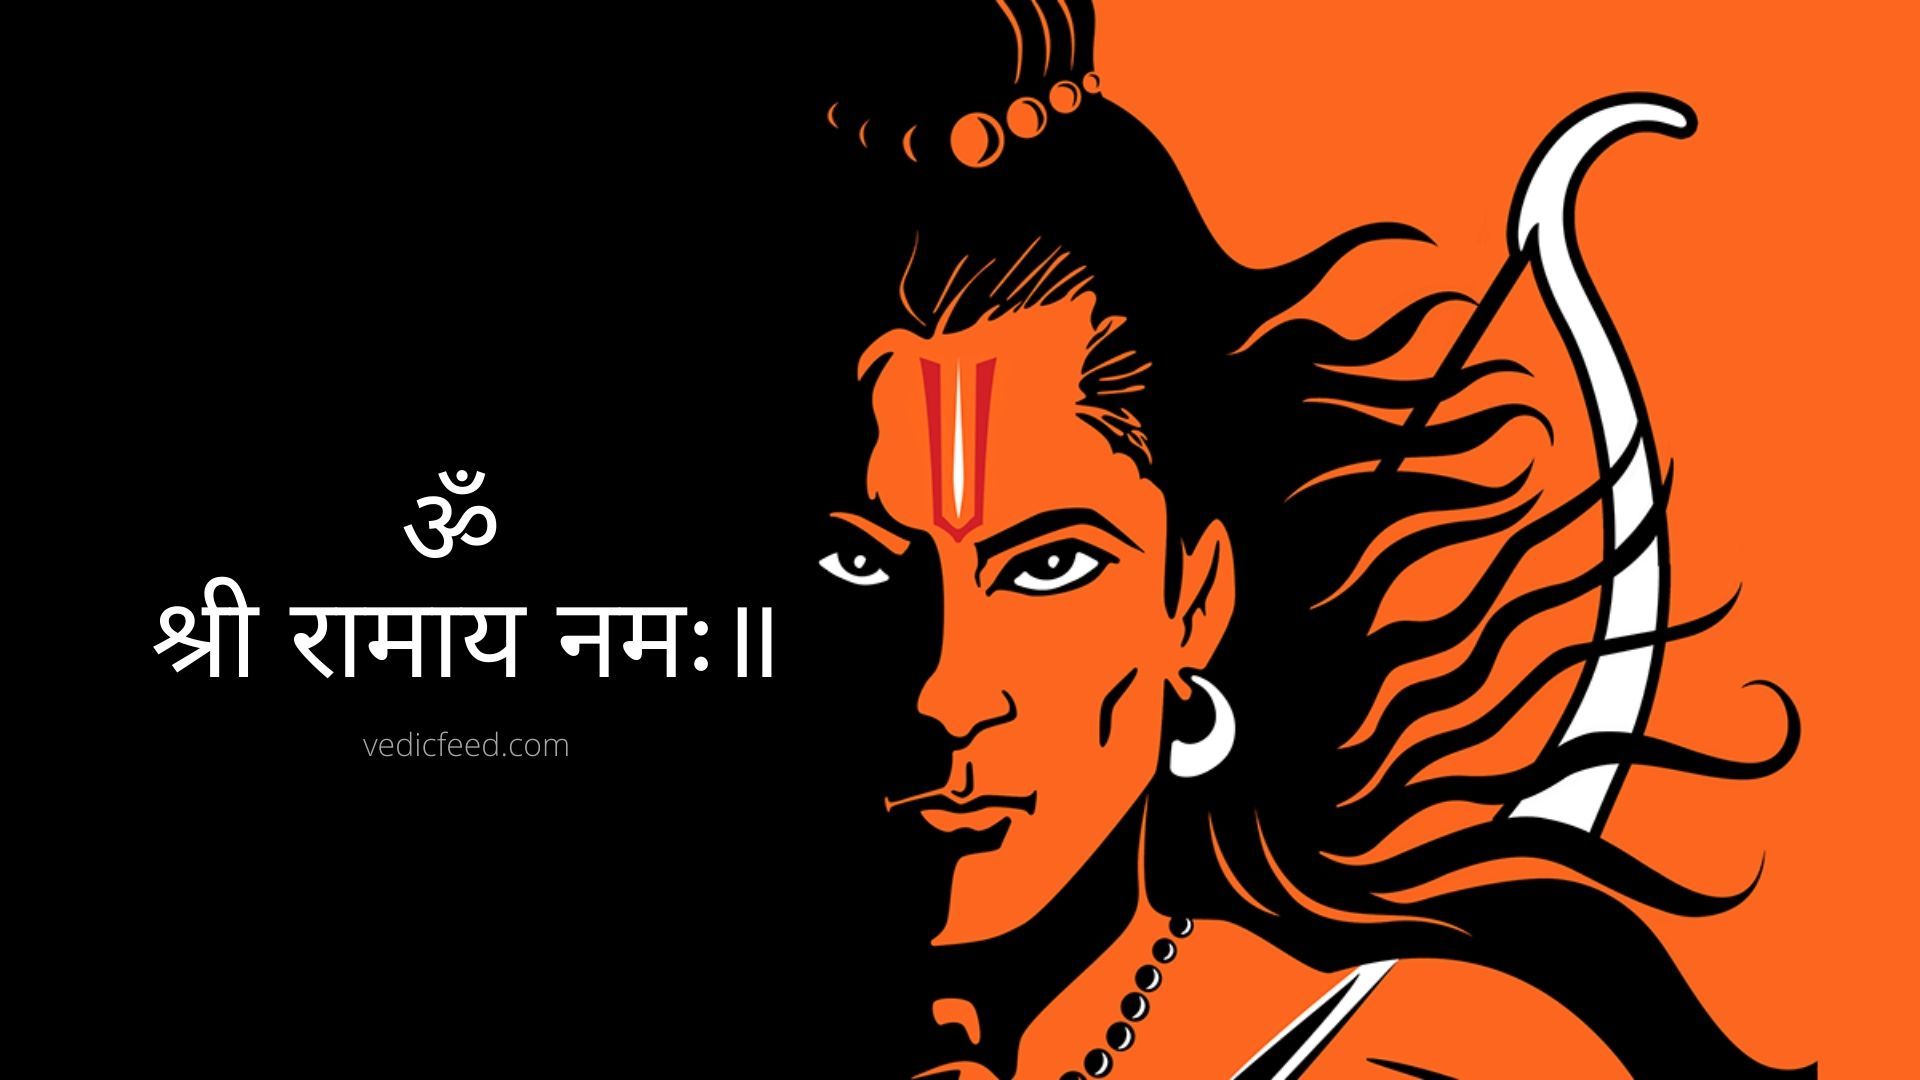 Download Shri Ram wallpaper by socialsadhu  23  Free on ZEDGE now  Browse millions of popular lord ram Wallpapers  Shri ram wallpaper Ram  wallpaper Ram image